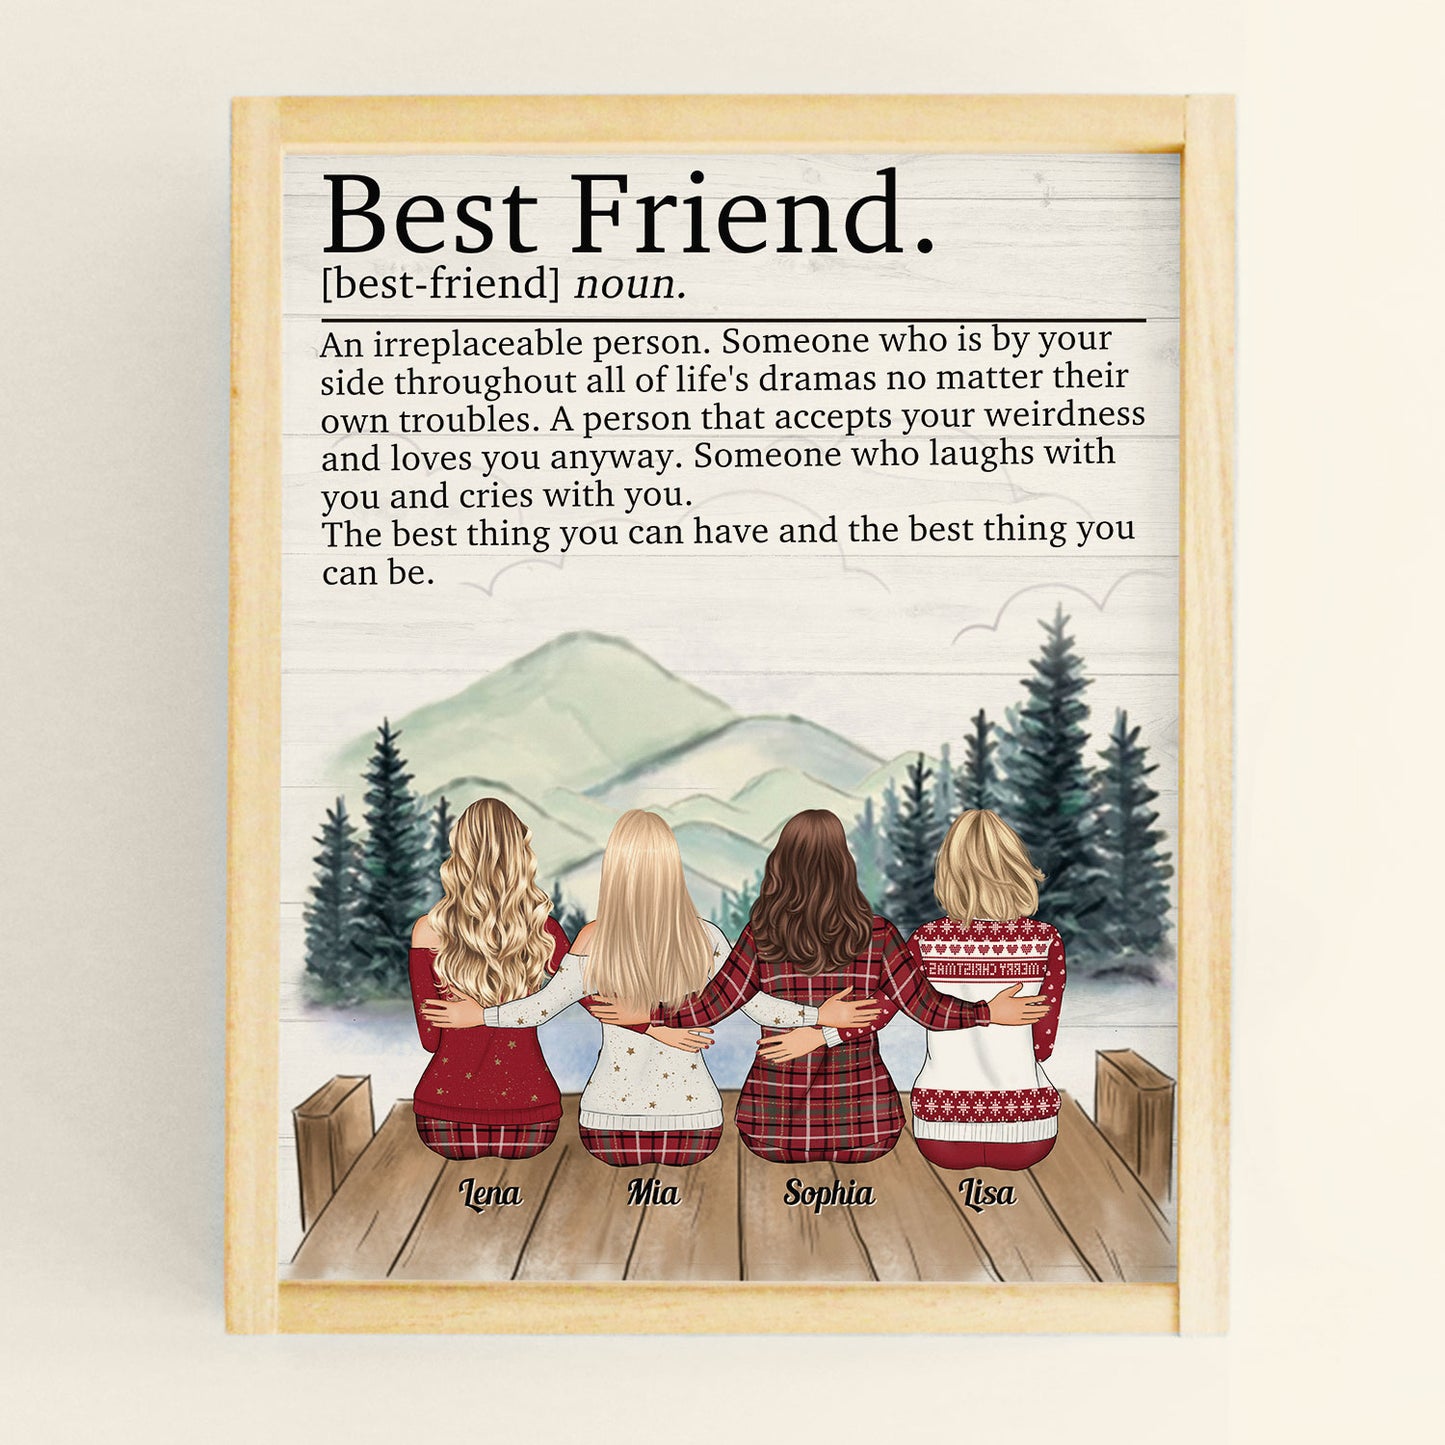 Best Friends An Irreplaceable Person - Personalized Poster - Family Hugging